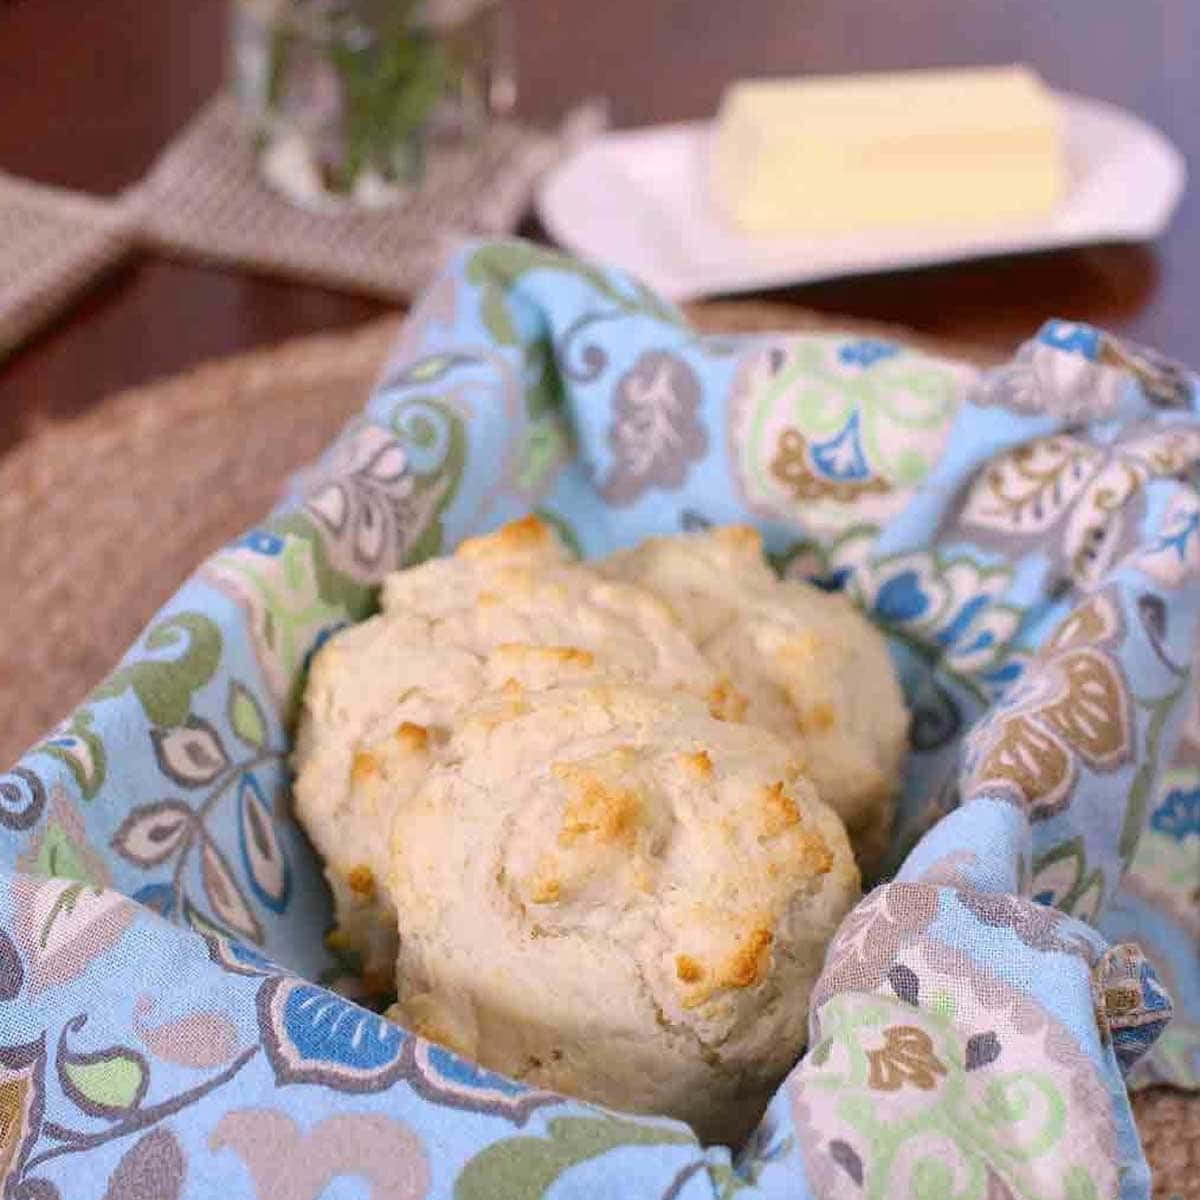 Enjoy a Delicious Homemade Biscuit